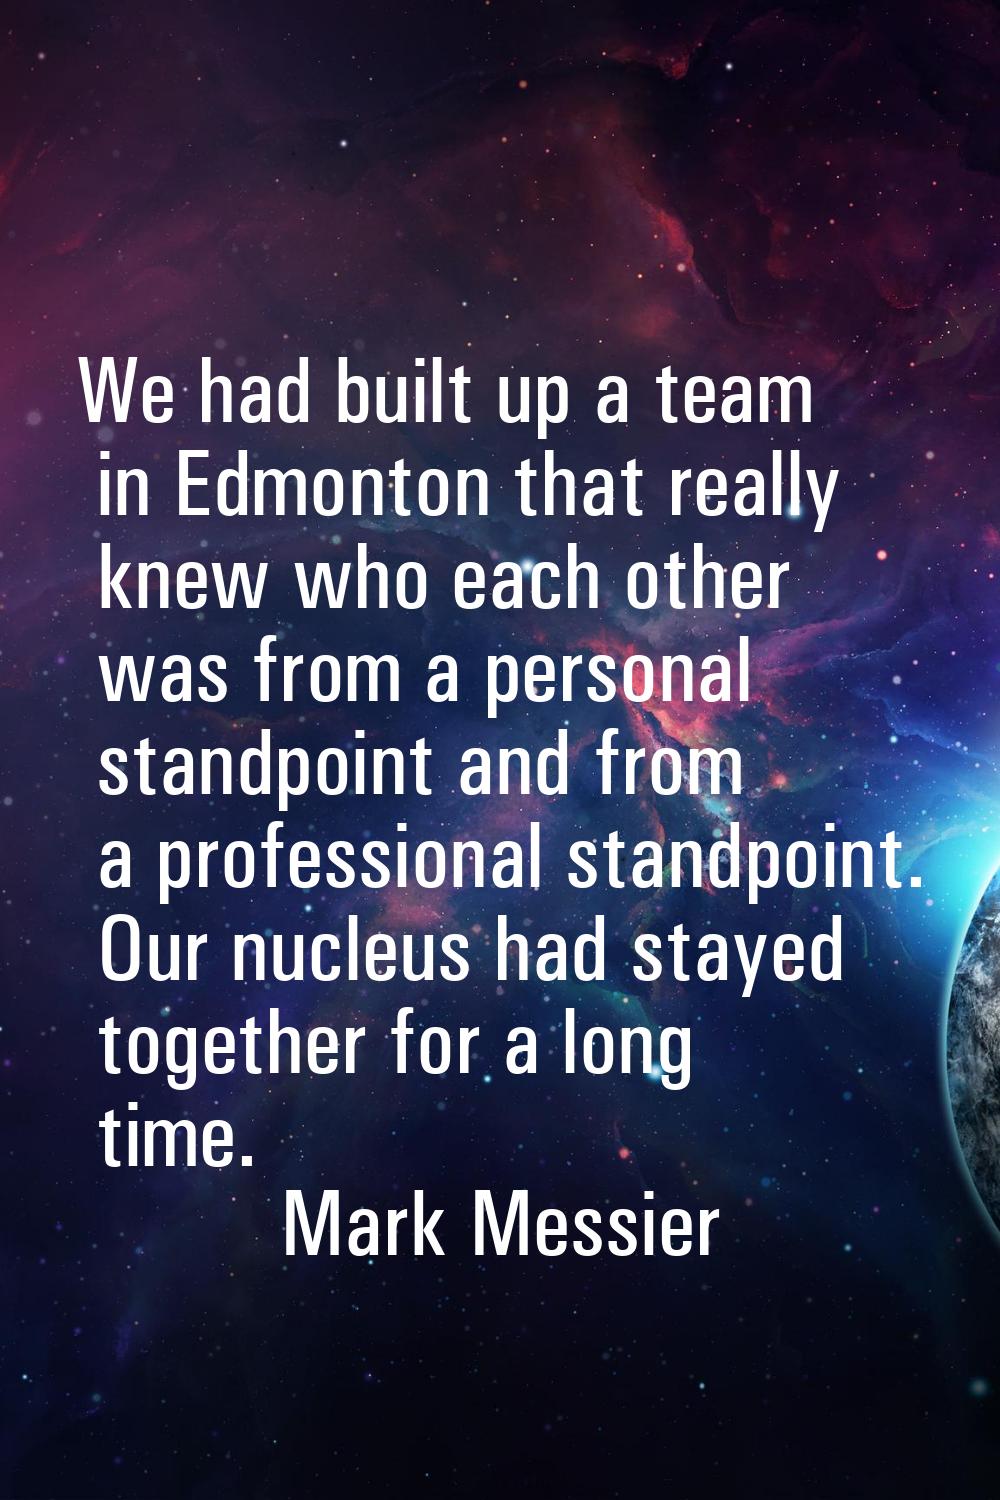 We had built up a team in Edmonton that really knew who each other was from a personal standpoint a